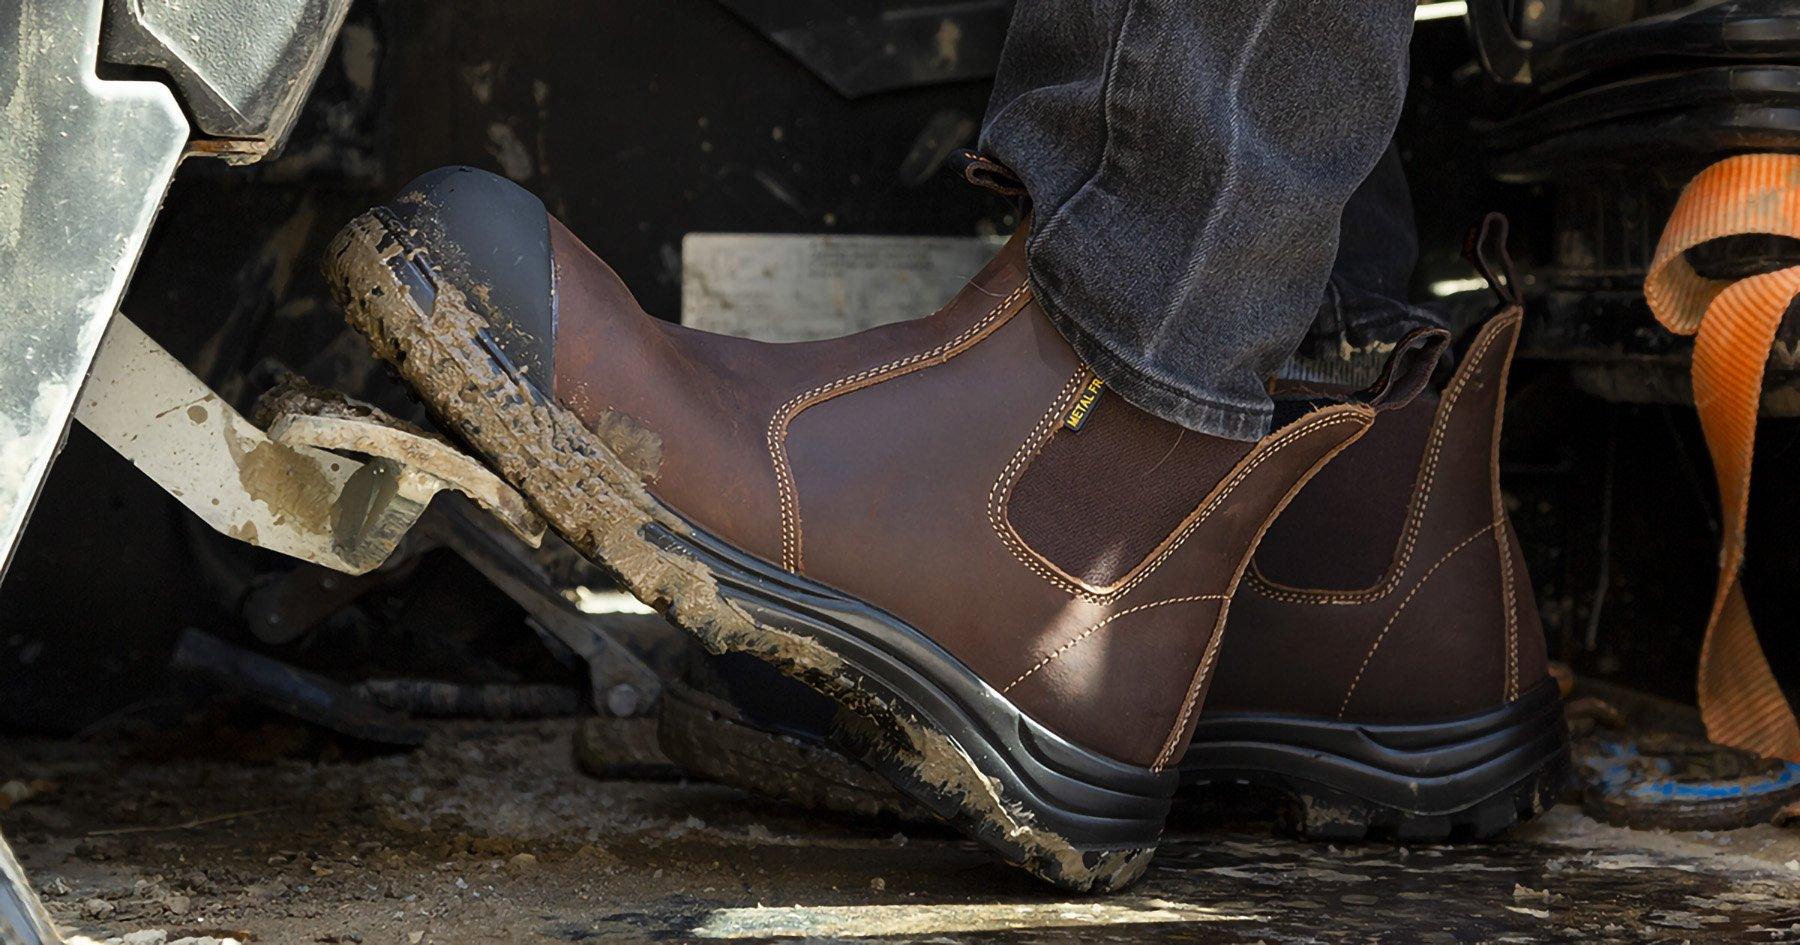 Composite Toe Work Boots in Canada - MooseLog